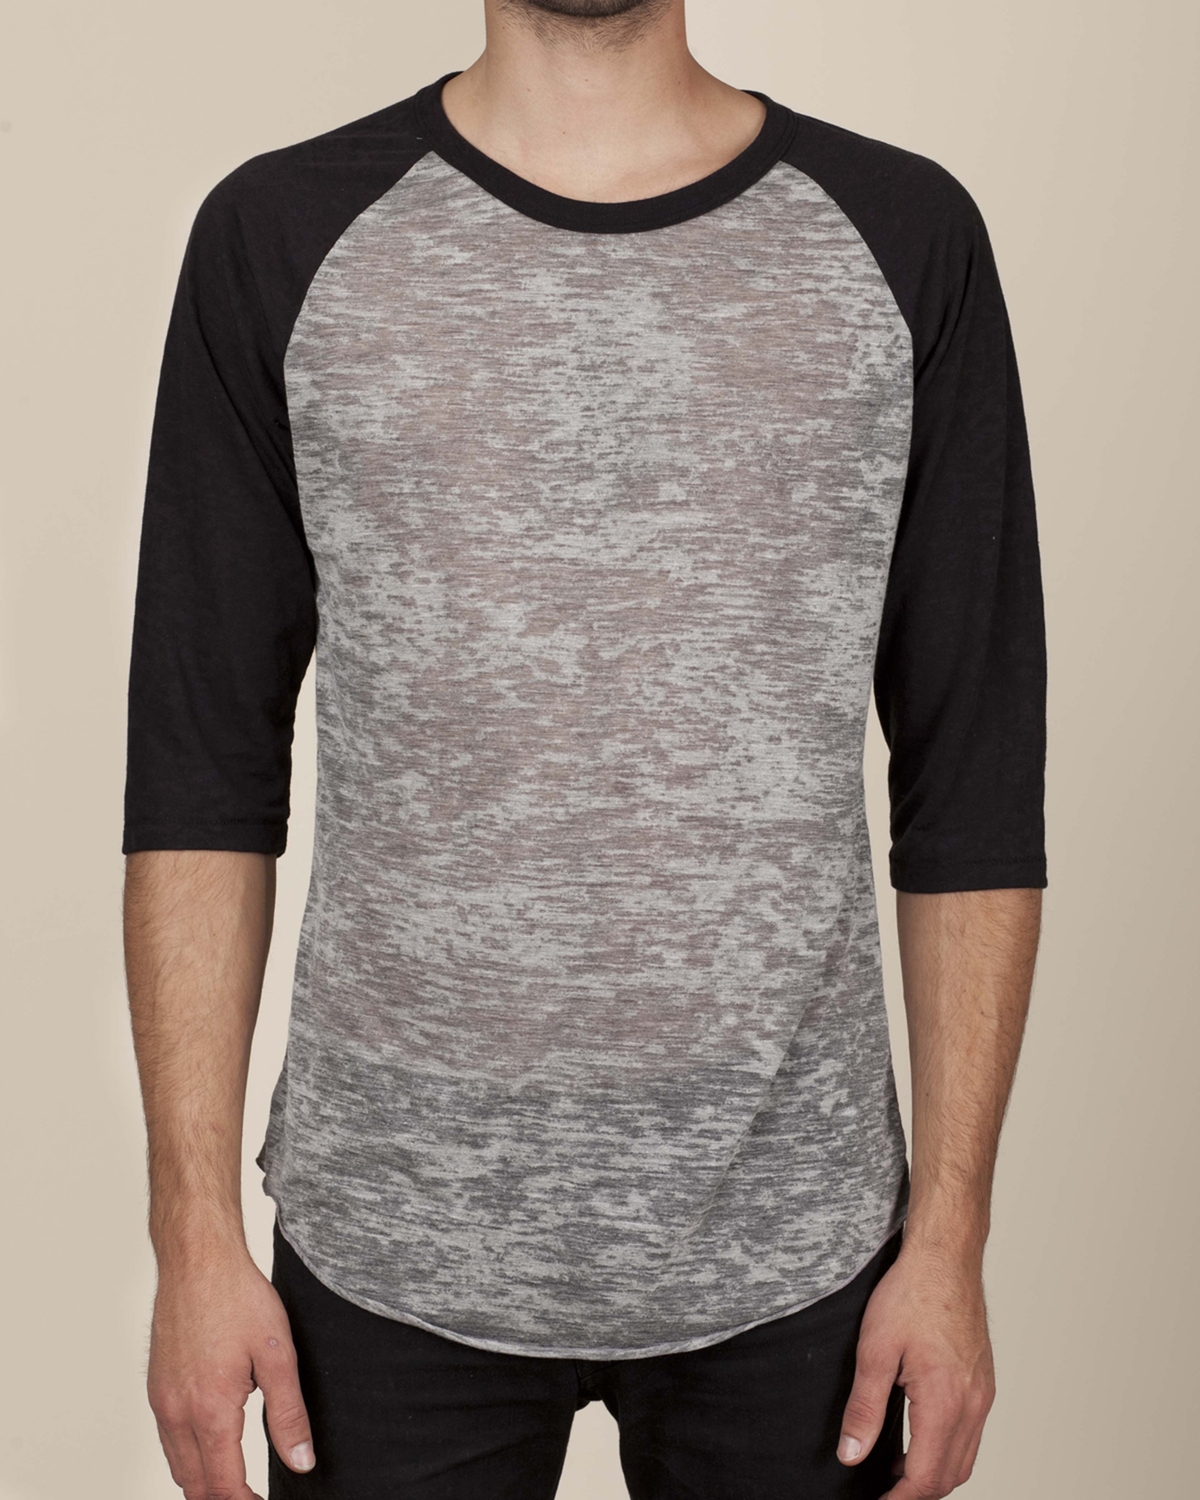 click to view GREY HEATHER/ BLACK